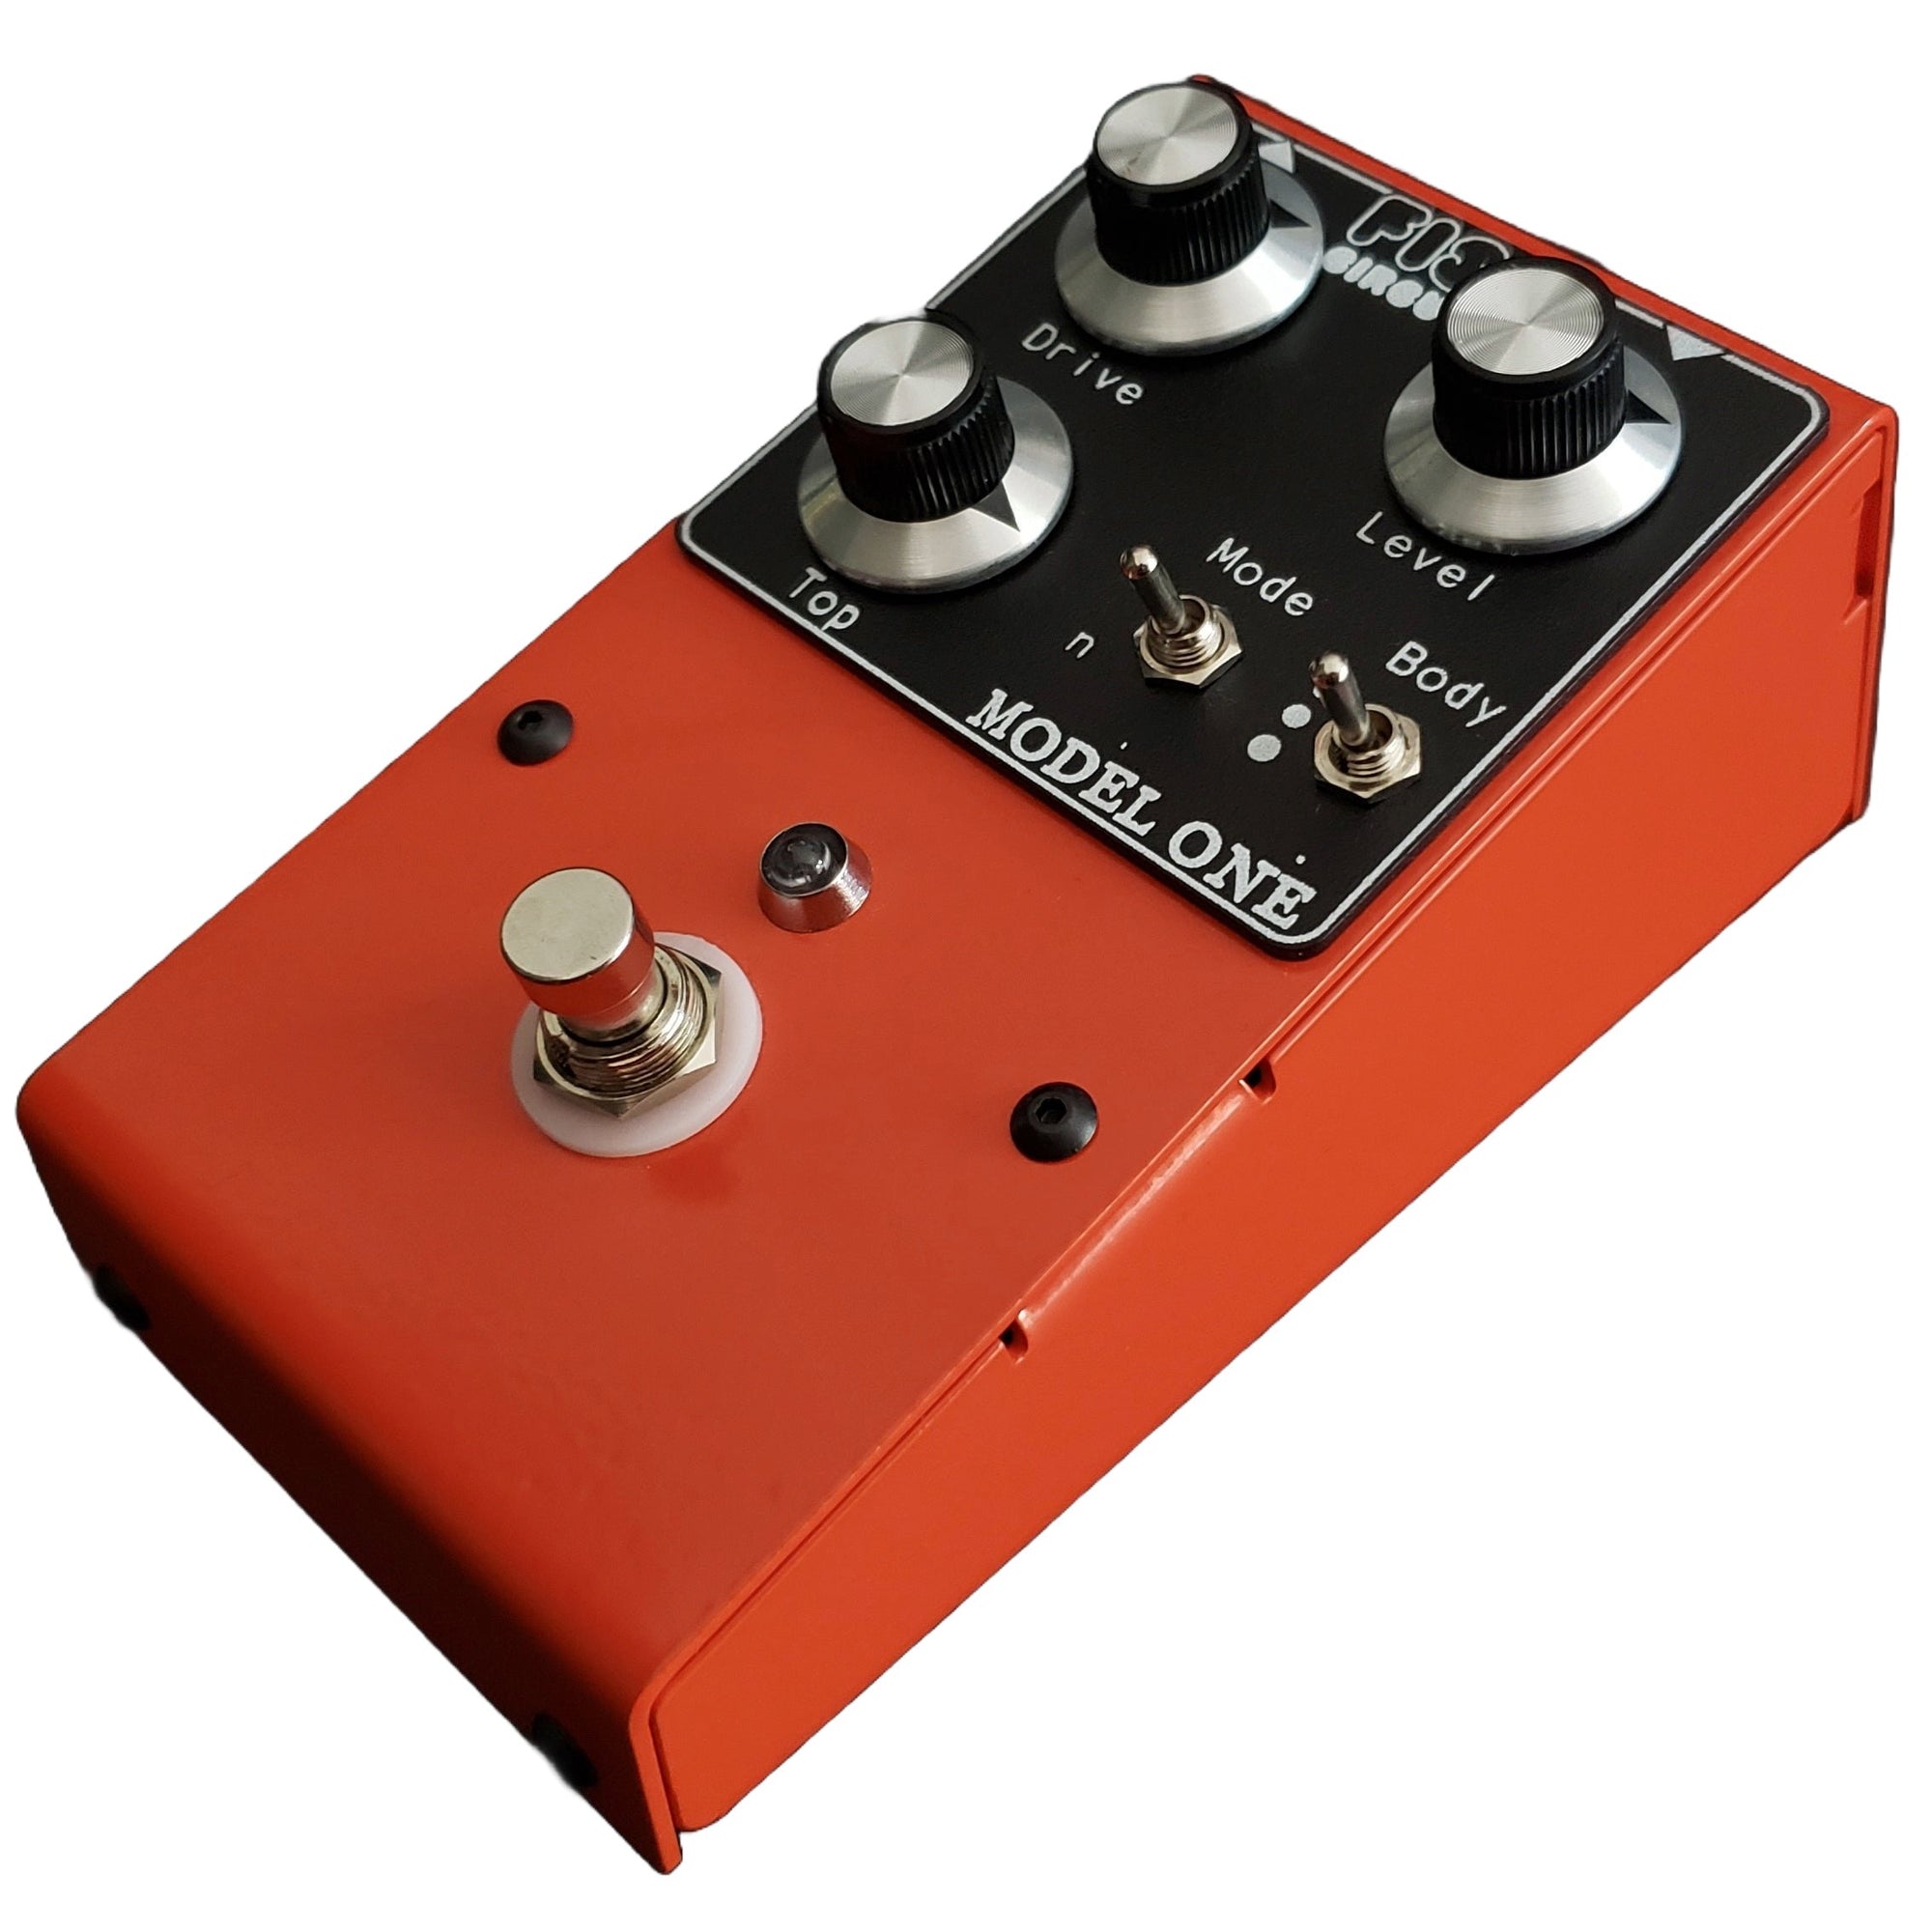 Fish Circuits Model One Overdrive